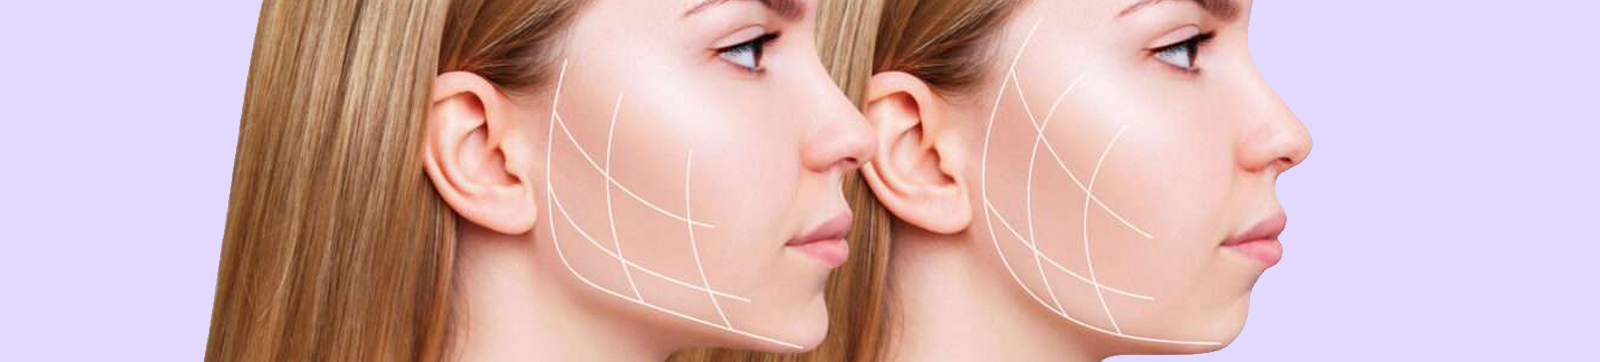 buccal fat reduction surgery clinic in delhi